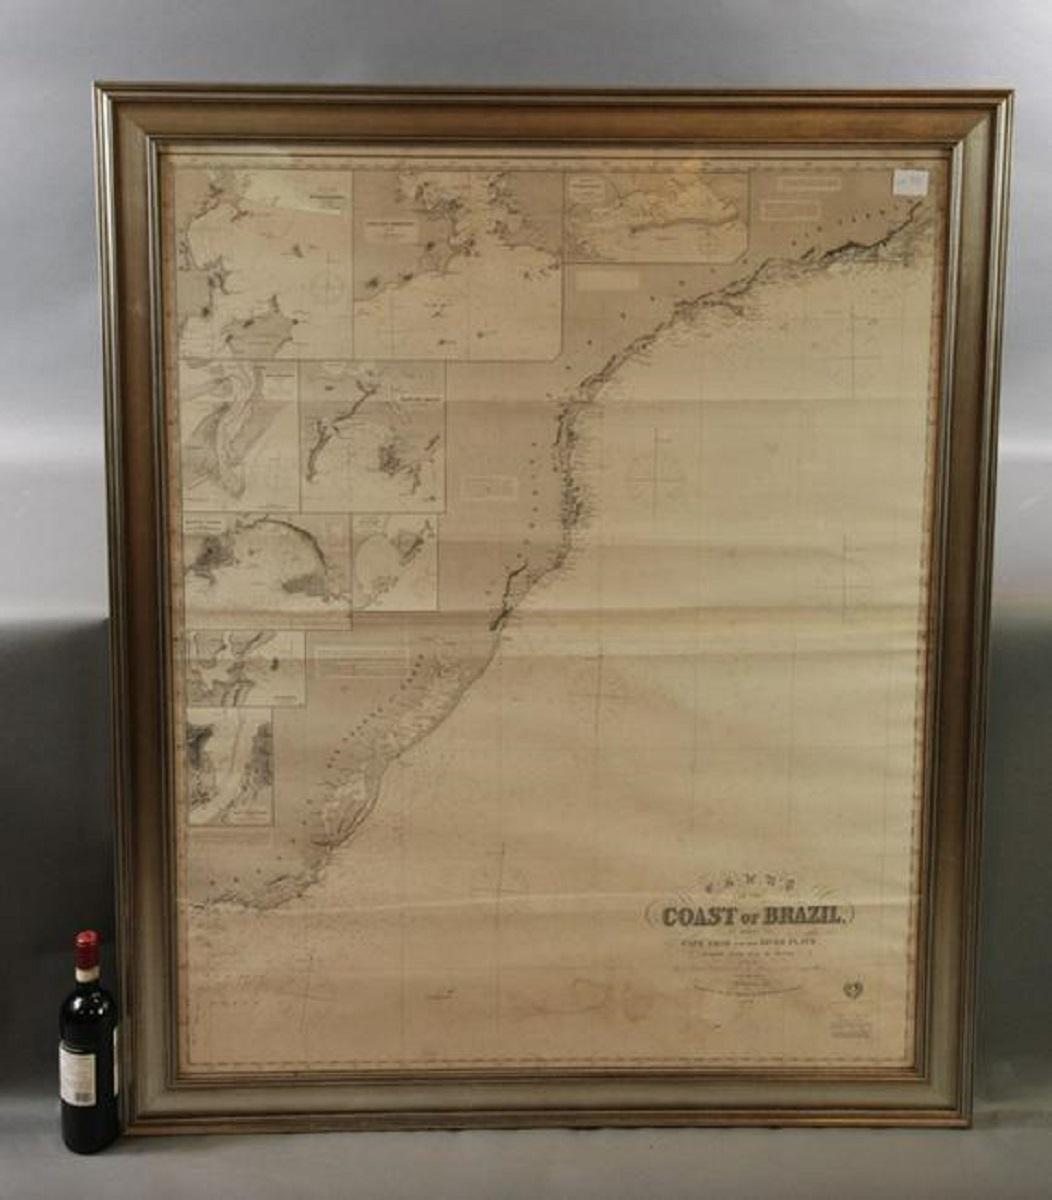 Imray & Son 1876 Nautical chart of the Coast of Brazil between Cape Frio and the River Plate. Nicely framed. Overall Dimensions: 46